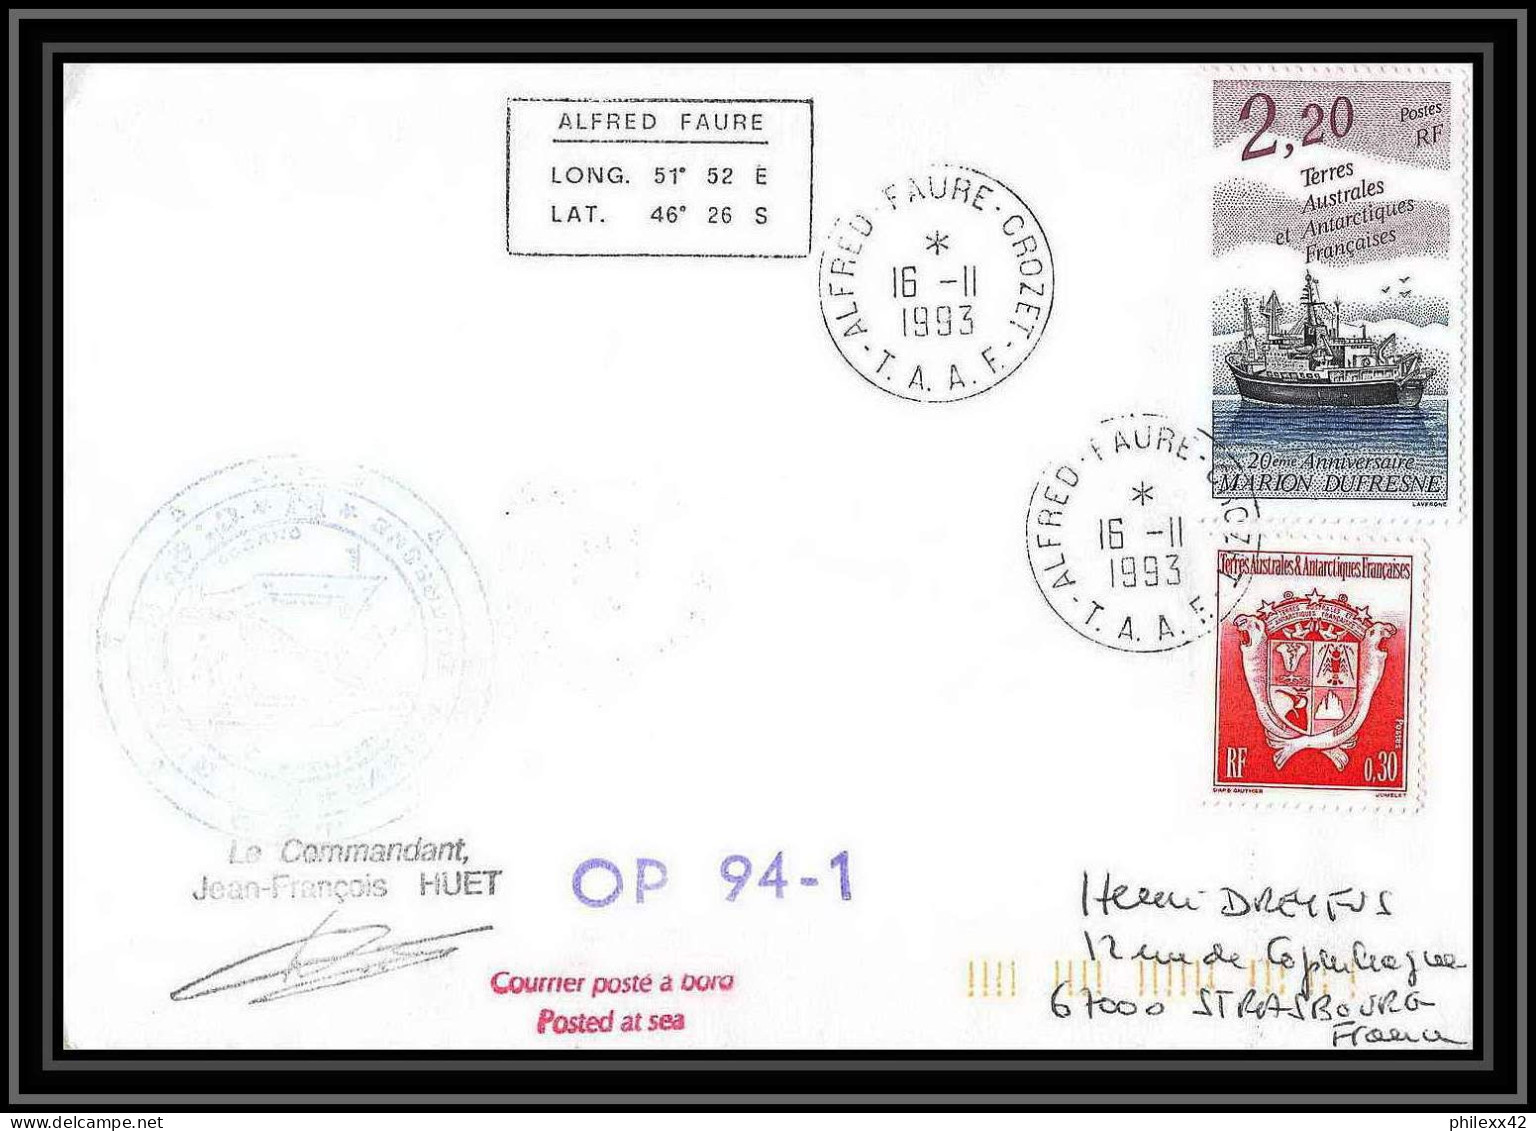 2323 ANTARCTIC Terres Australes TAAF Lettre Cover Dufresne Op 94/1 Signé Signed 16/11/1993 - Antarktis-Expeditionen